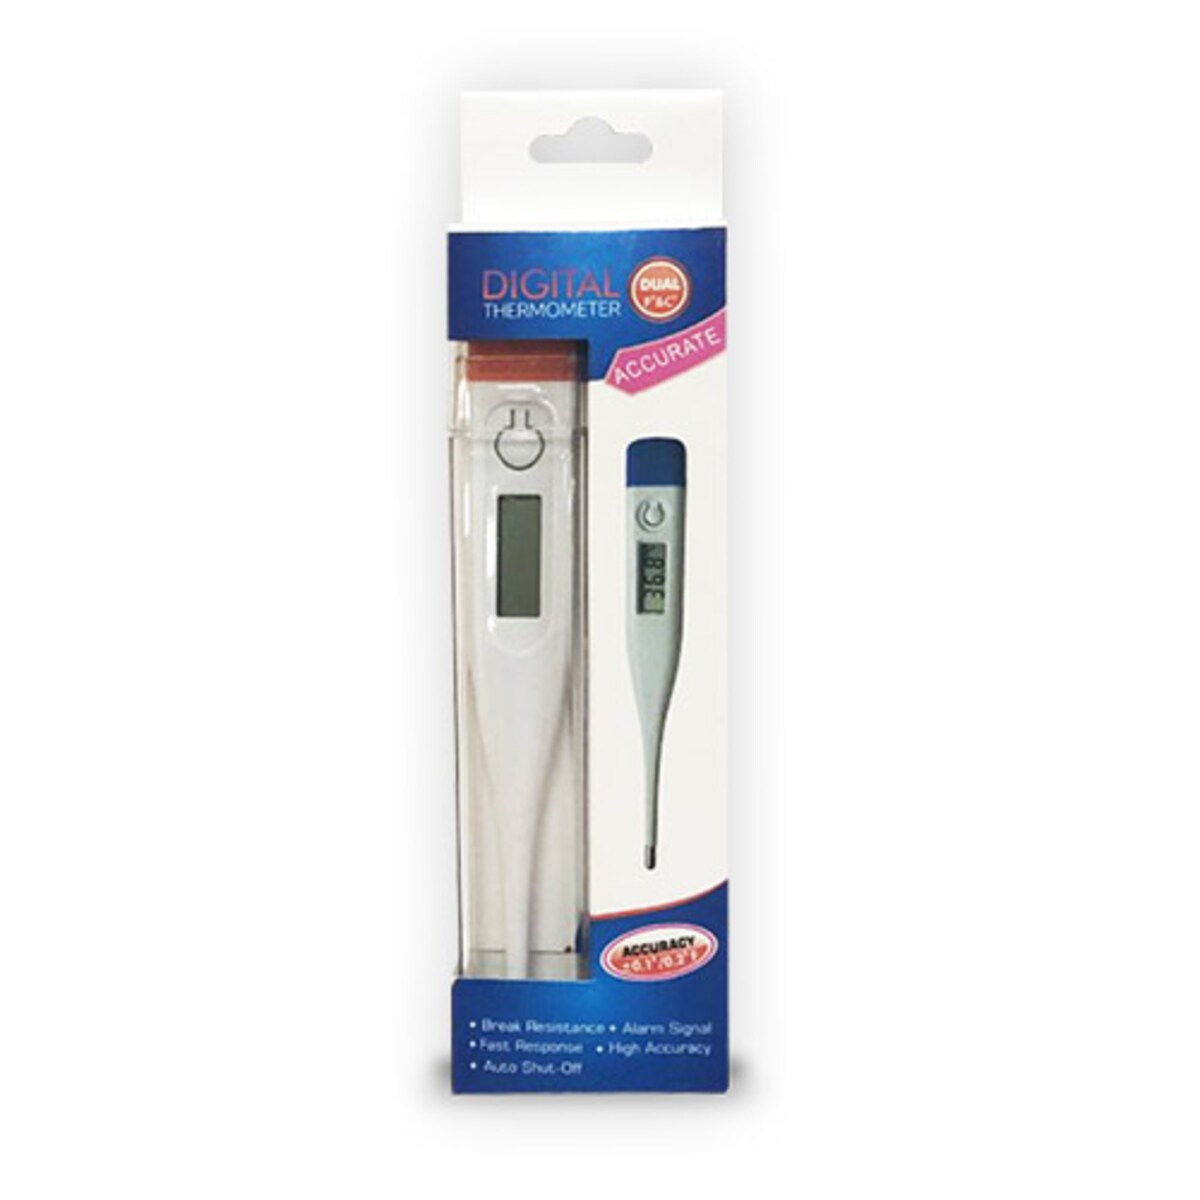 Airssential Digital Stick Thermometer